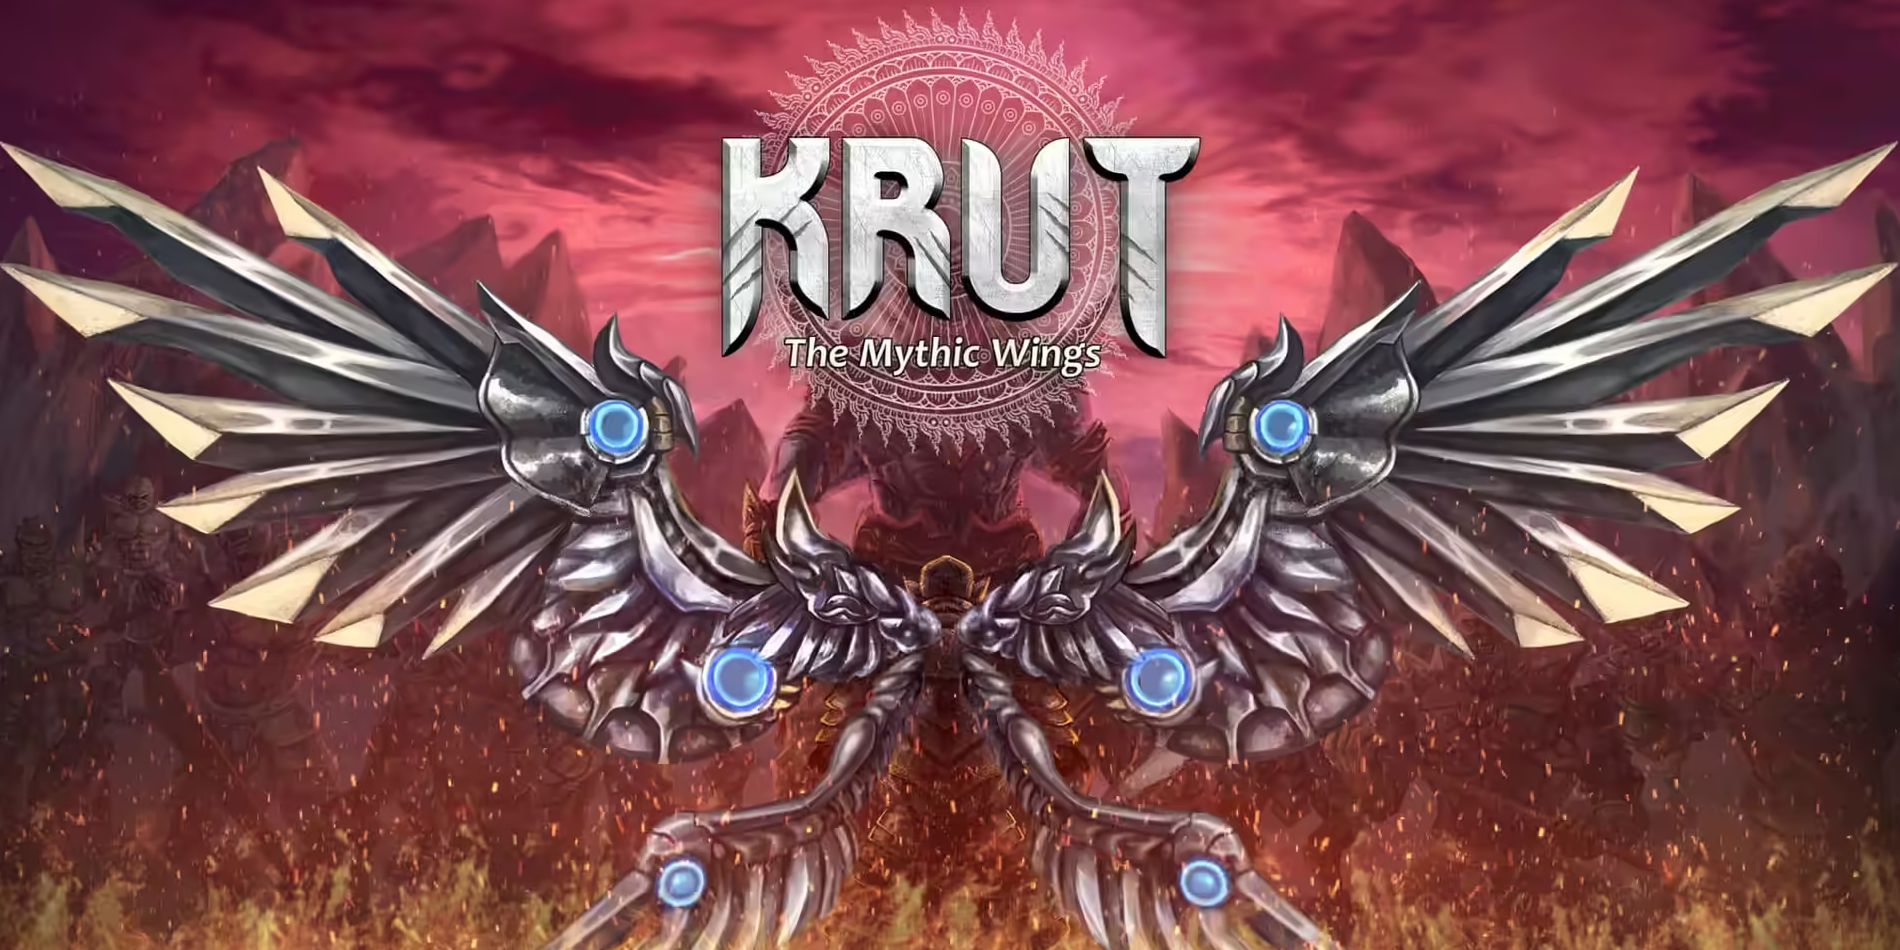 Krut: The Mythic Wings Review - Historia corta, combate predecible